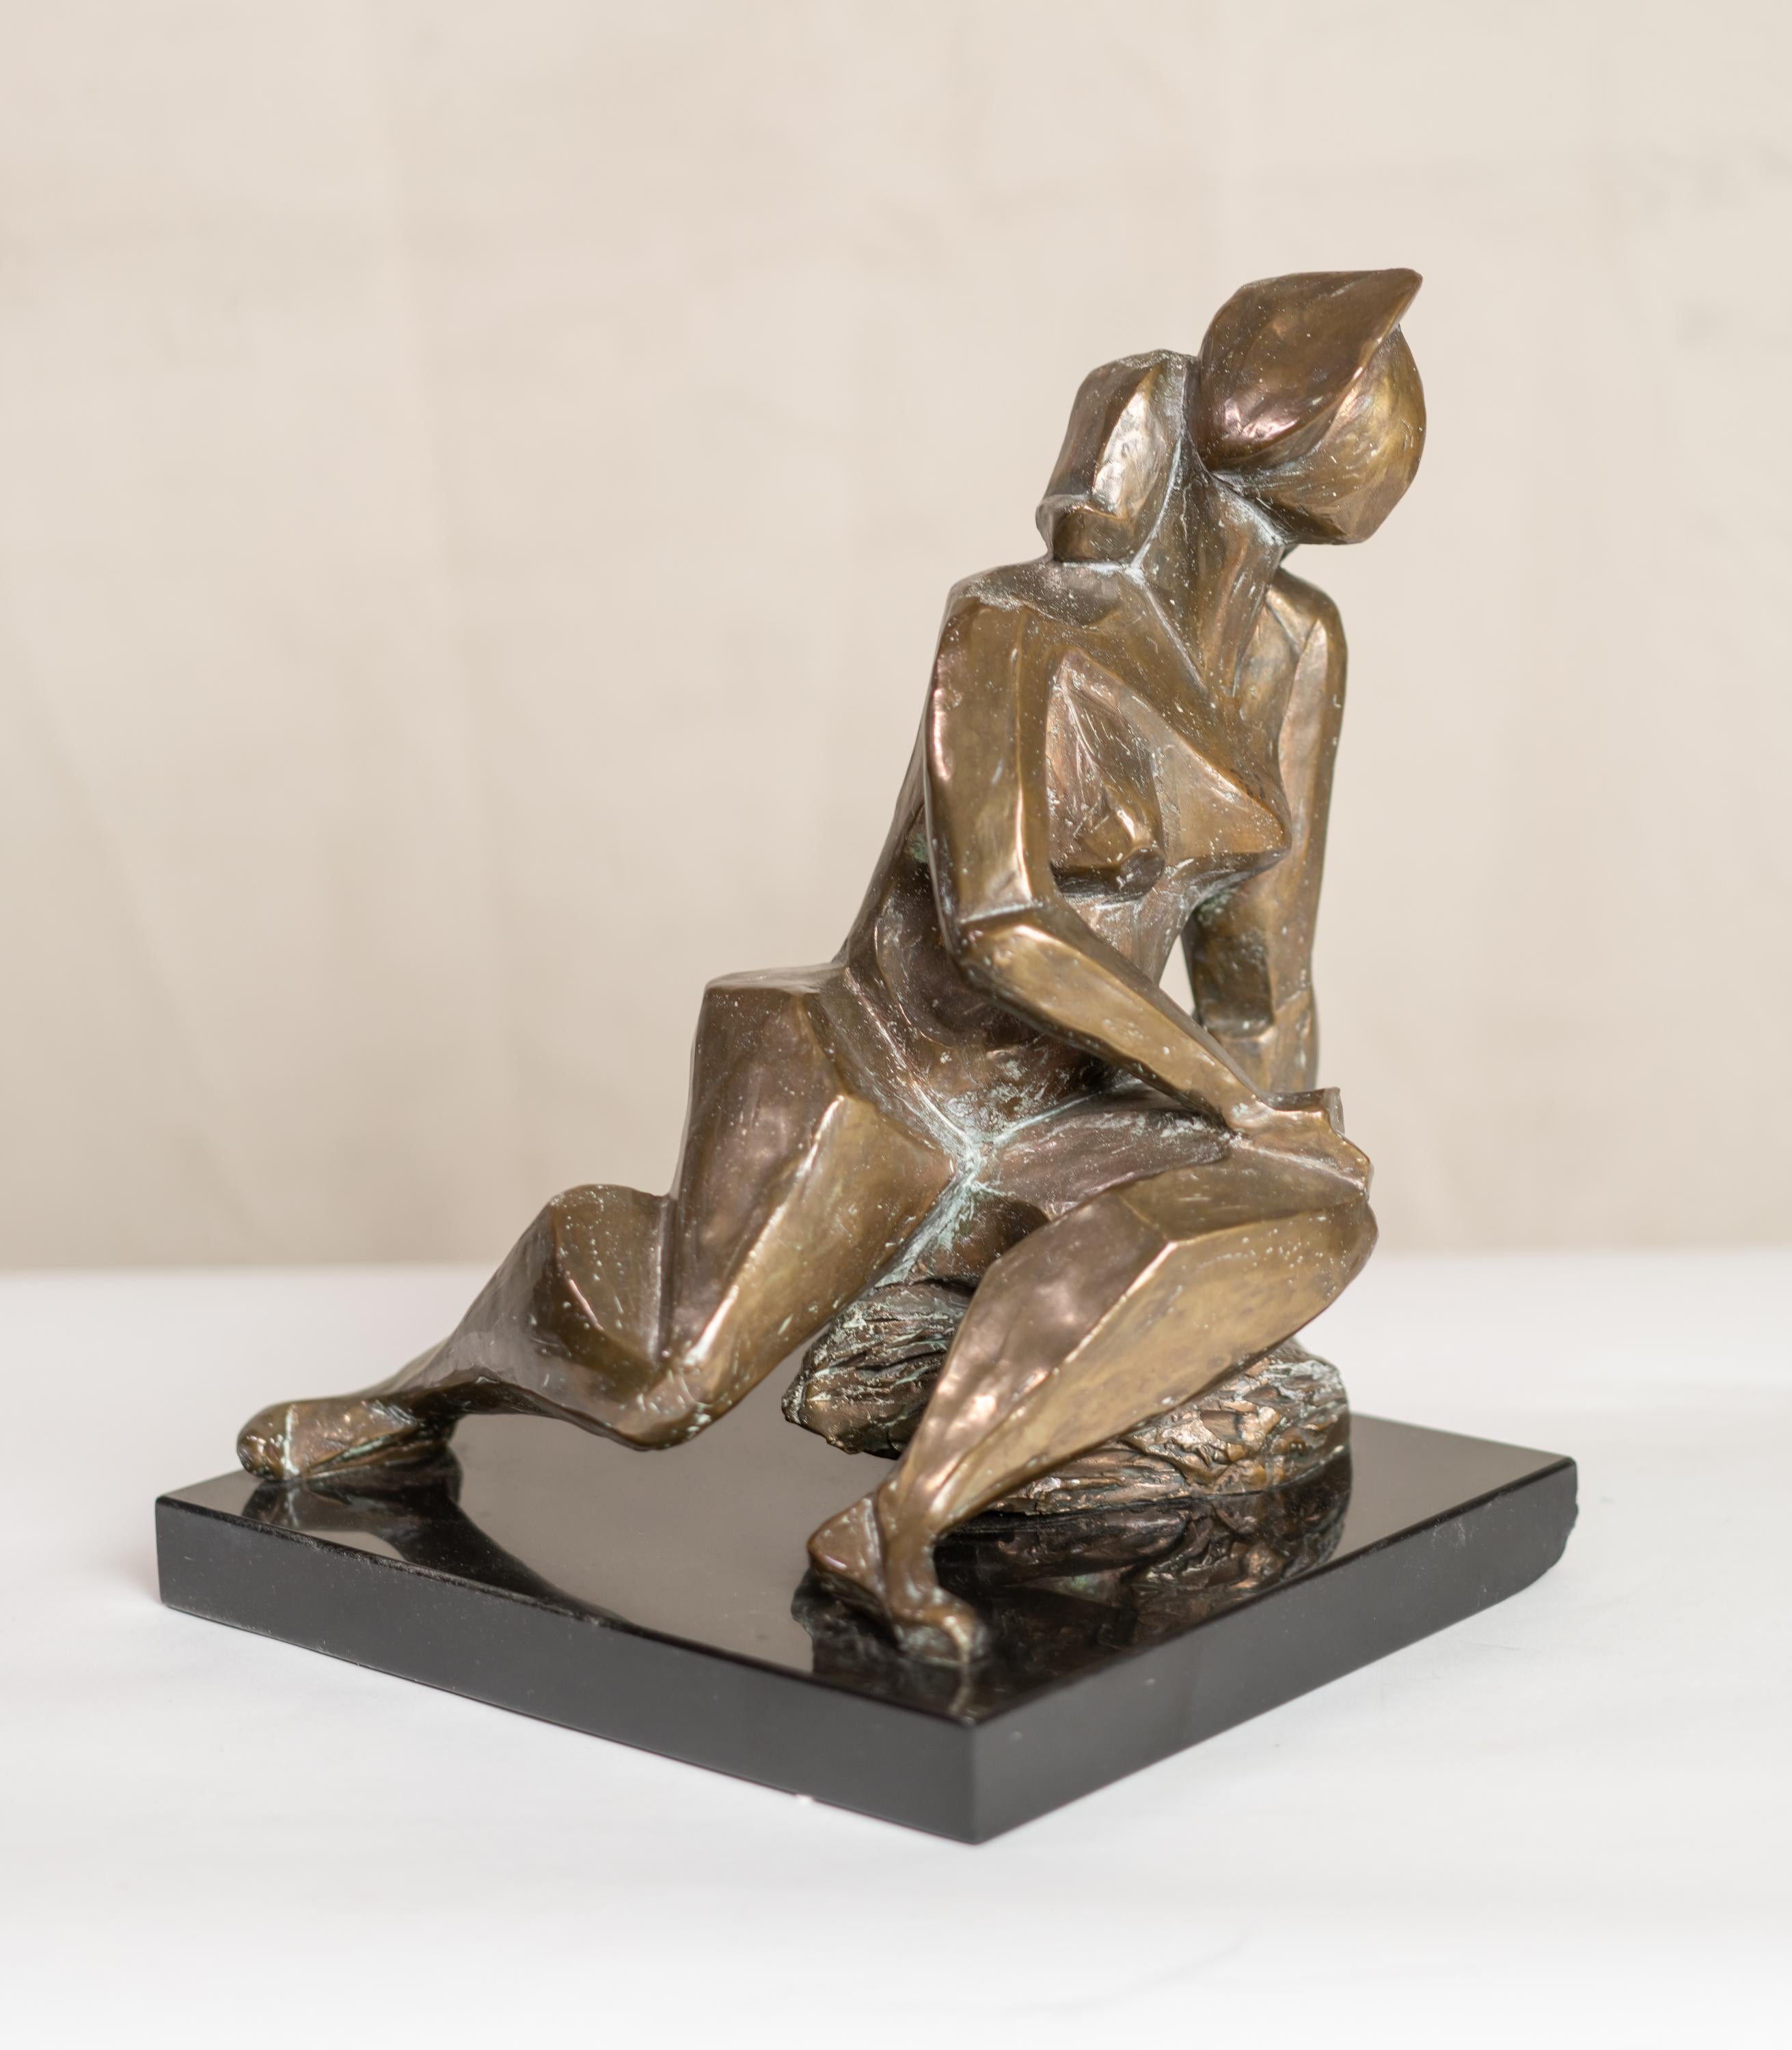 Cubist style bronze sitting woman by Caroline Newhouse. Signed: 